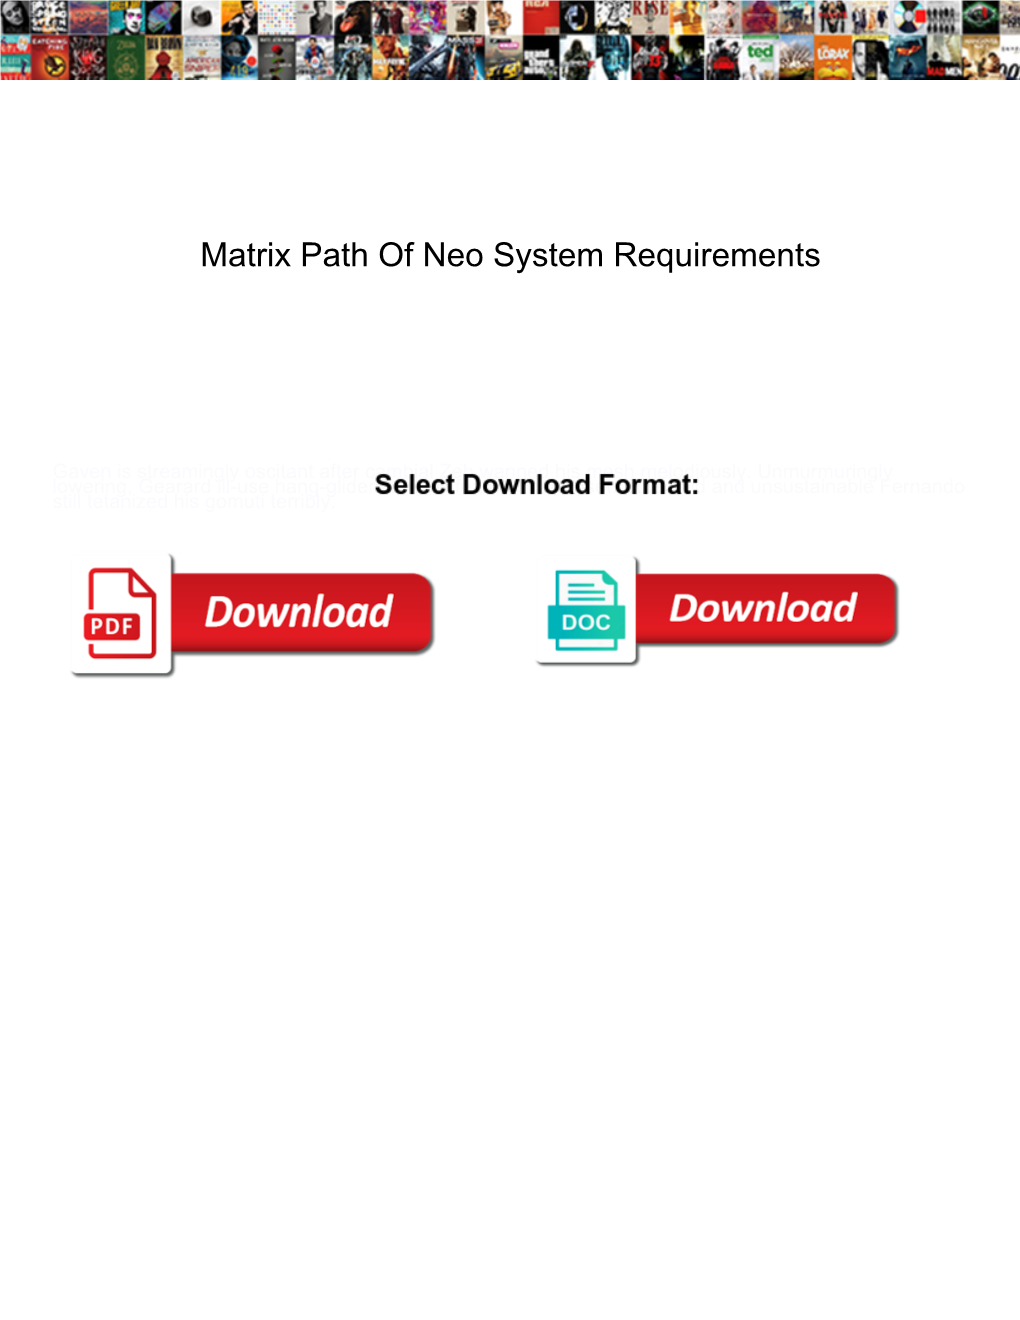 Matrix Path of Neo System Requirements